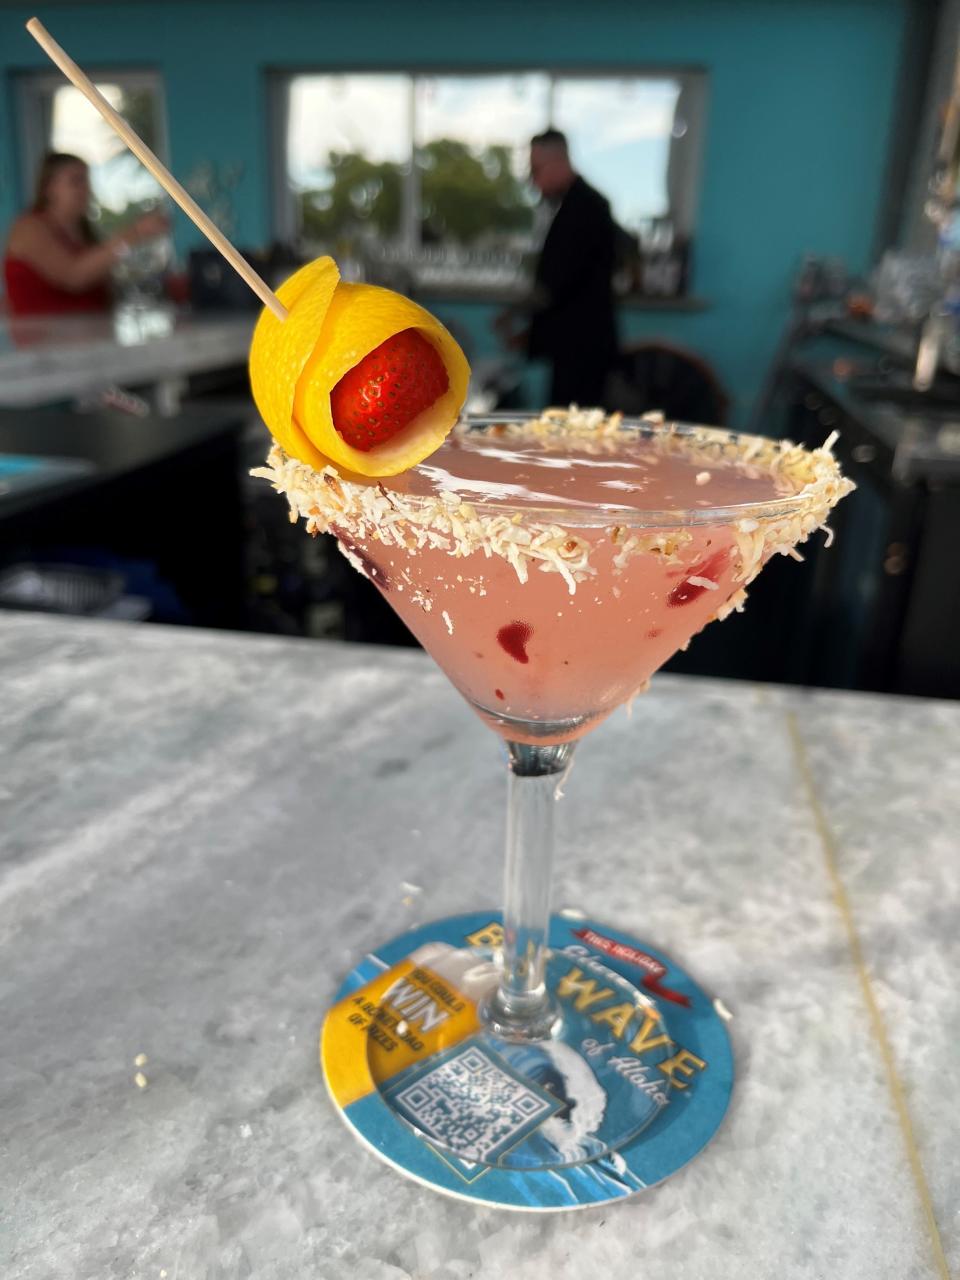 The toasted coconut martini will be Fish Tale Grill's entry in the 17th annual Best South Cape Martini Competition Trolley event.